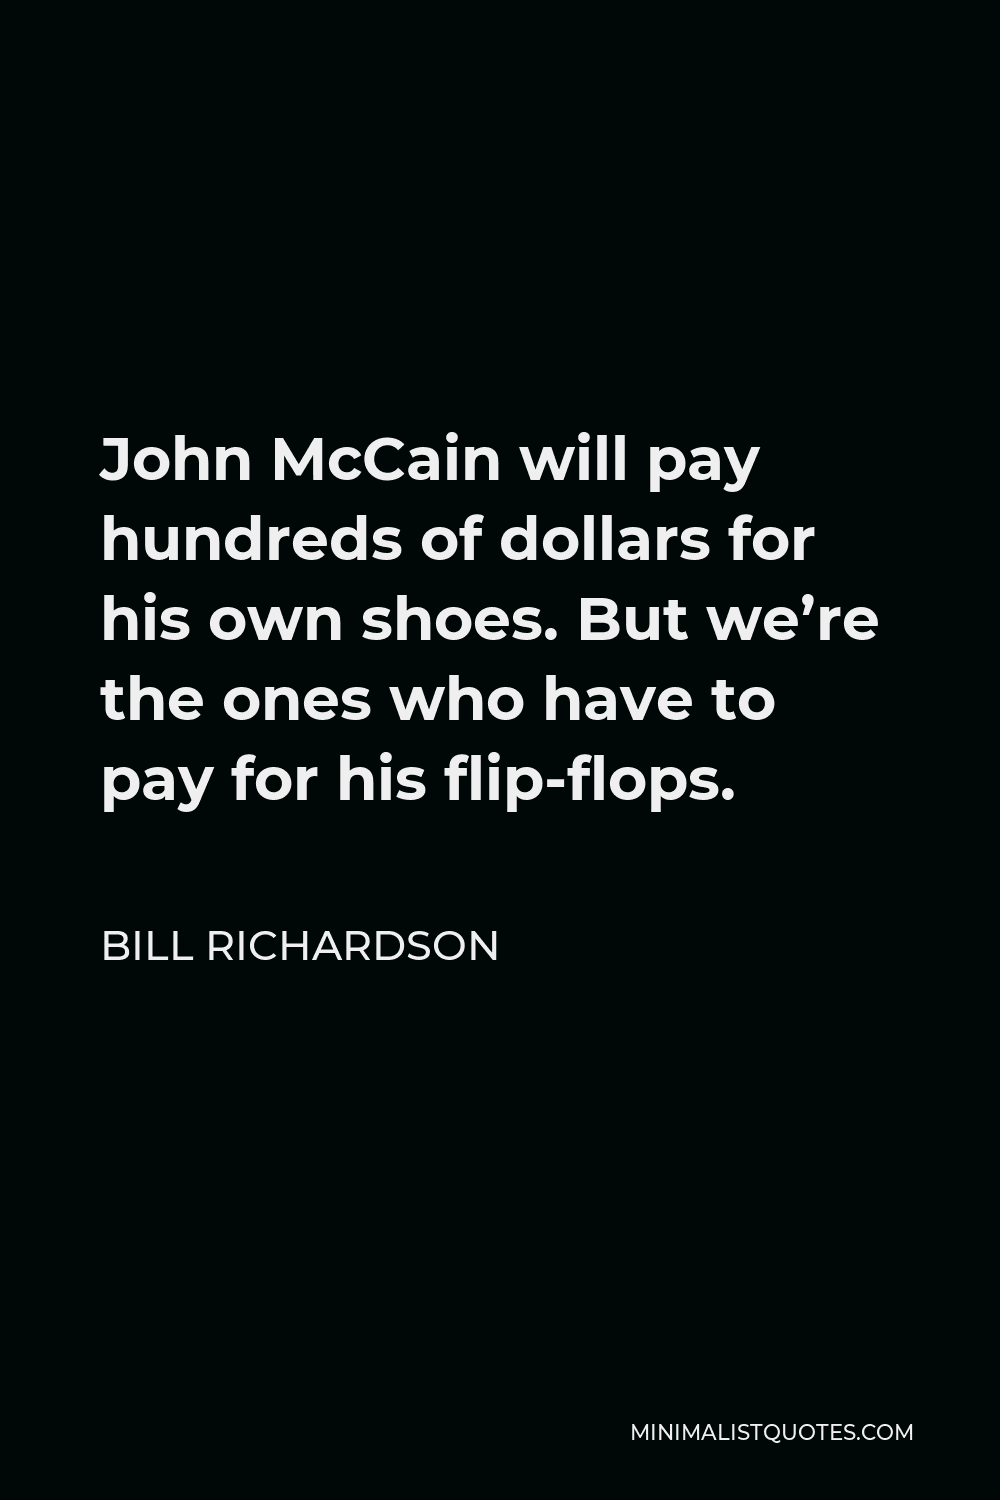 Bill Richardson Quote - John McCain will pay hundreds of dollars for his own shoes. But we’re the ones who have to pay for his flip-flops.